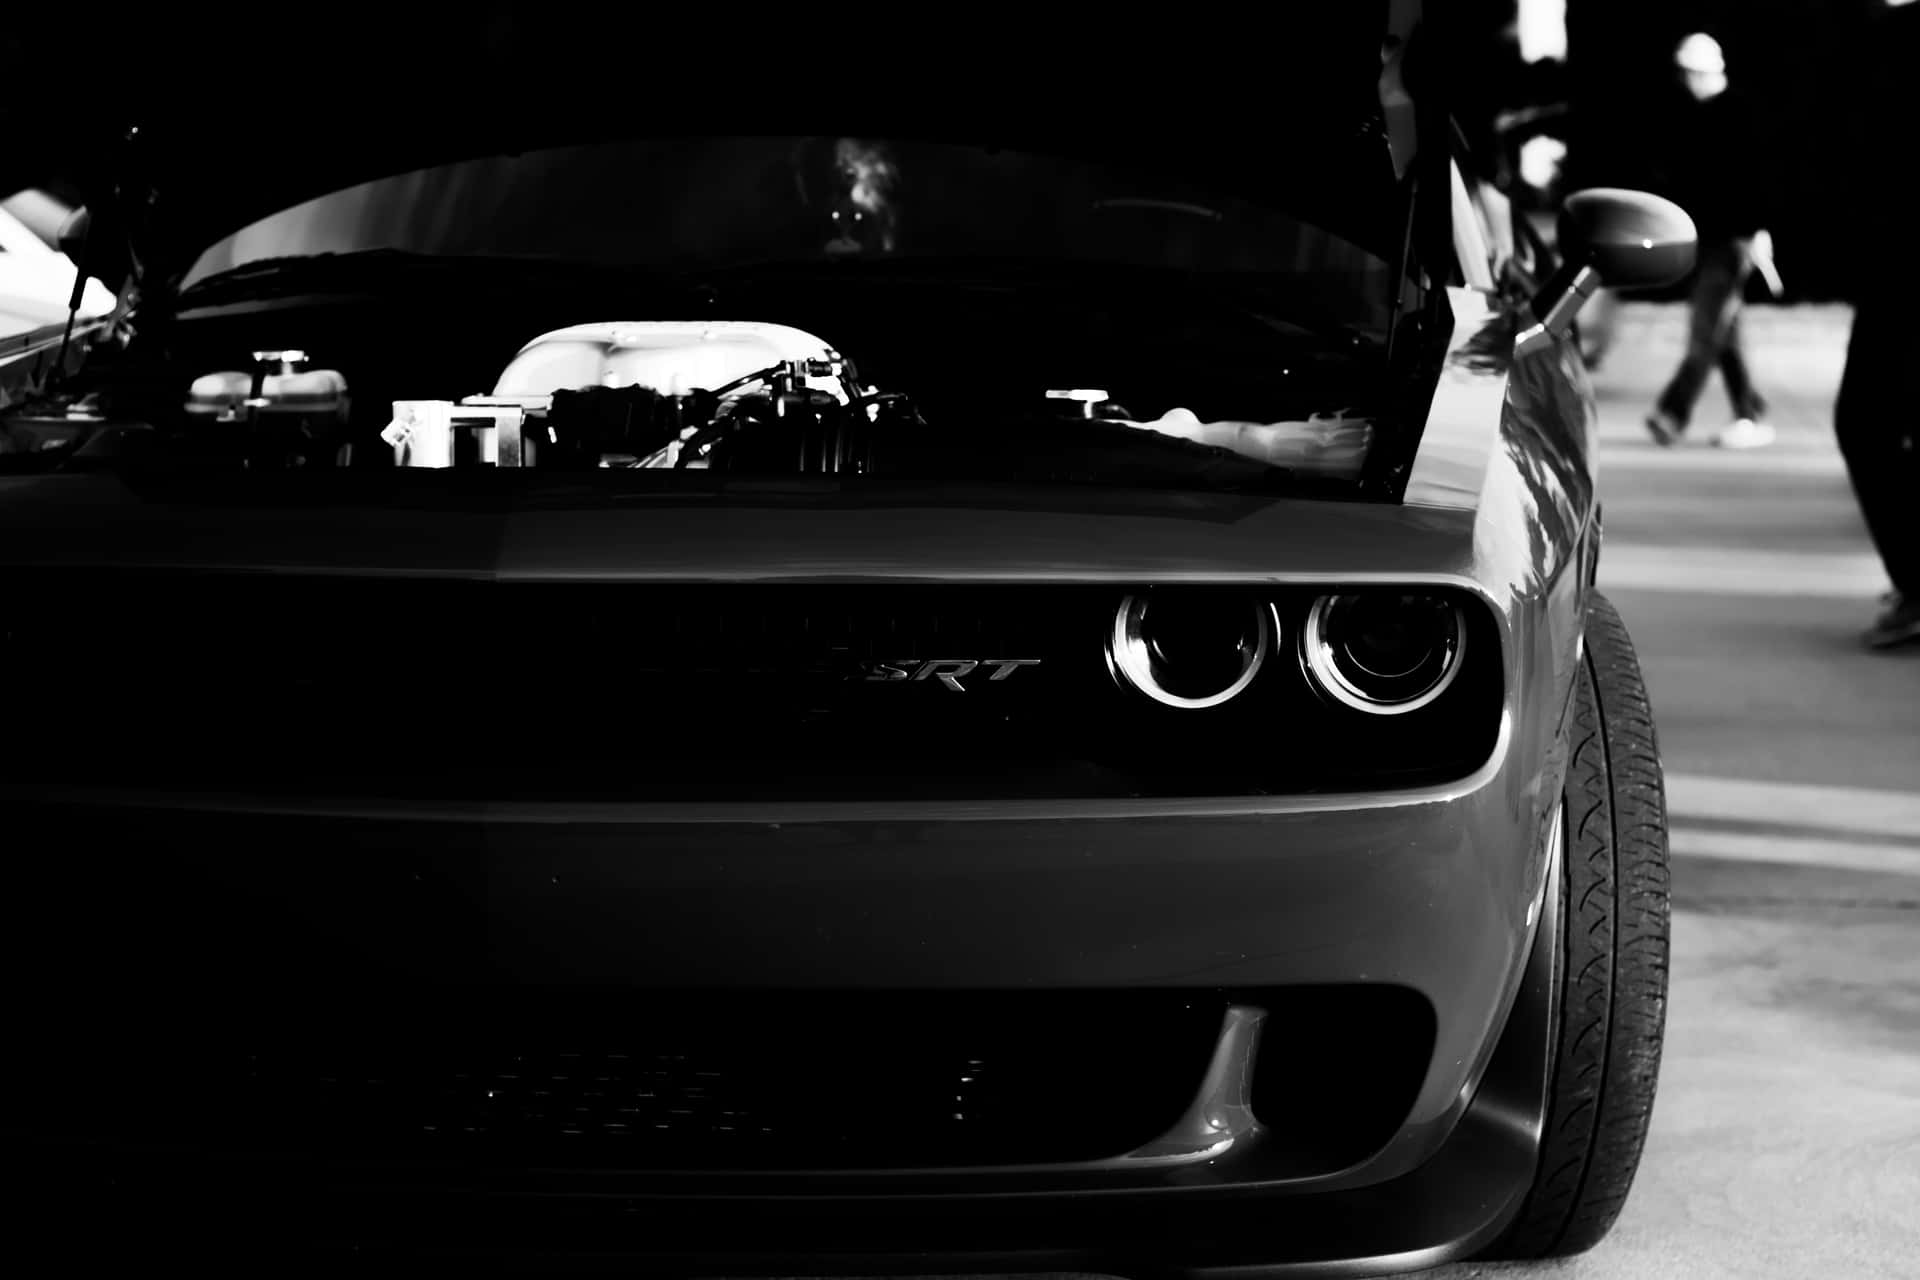 Black Dodge Charger S R T Front View Wallpaper